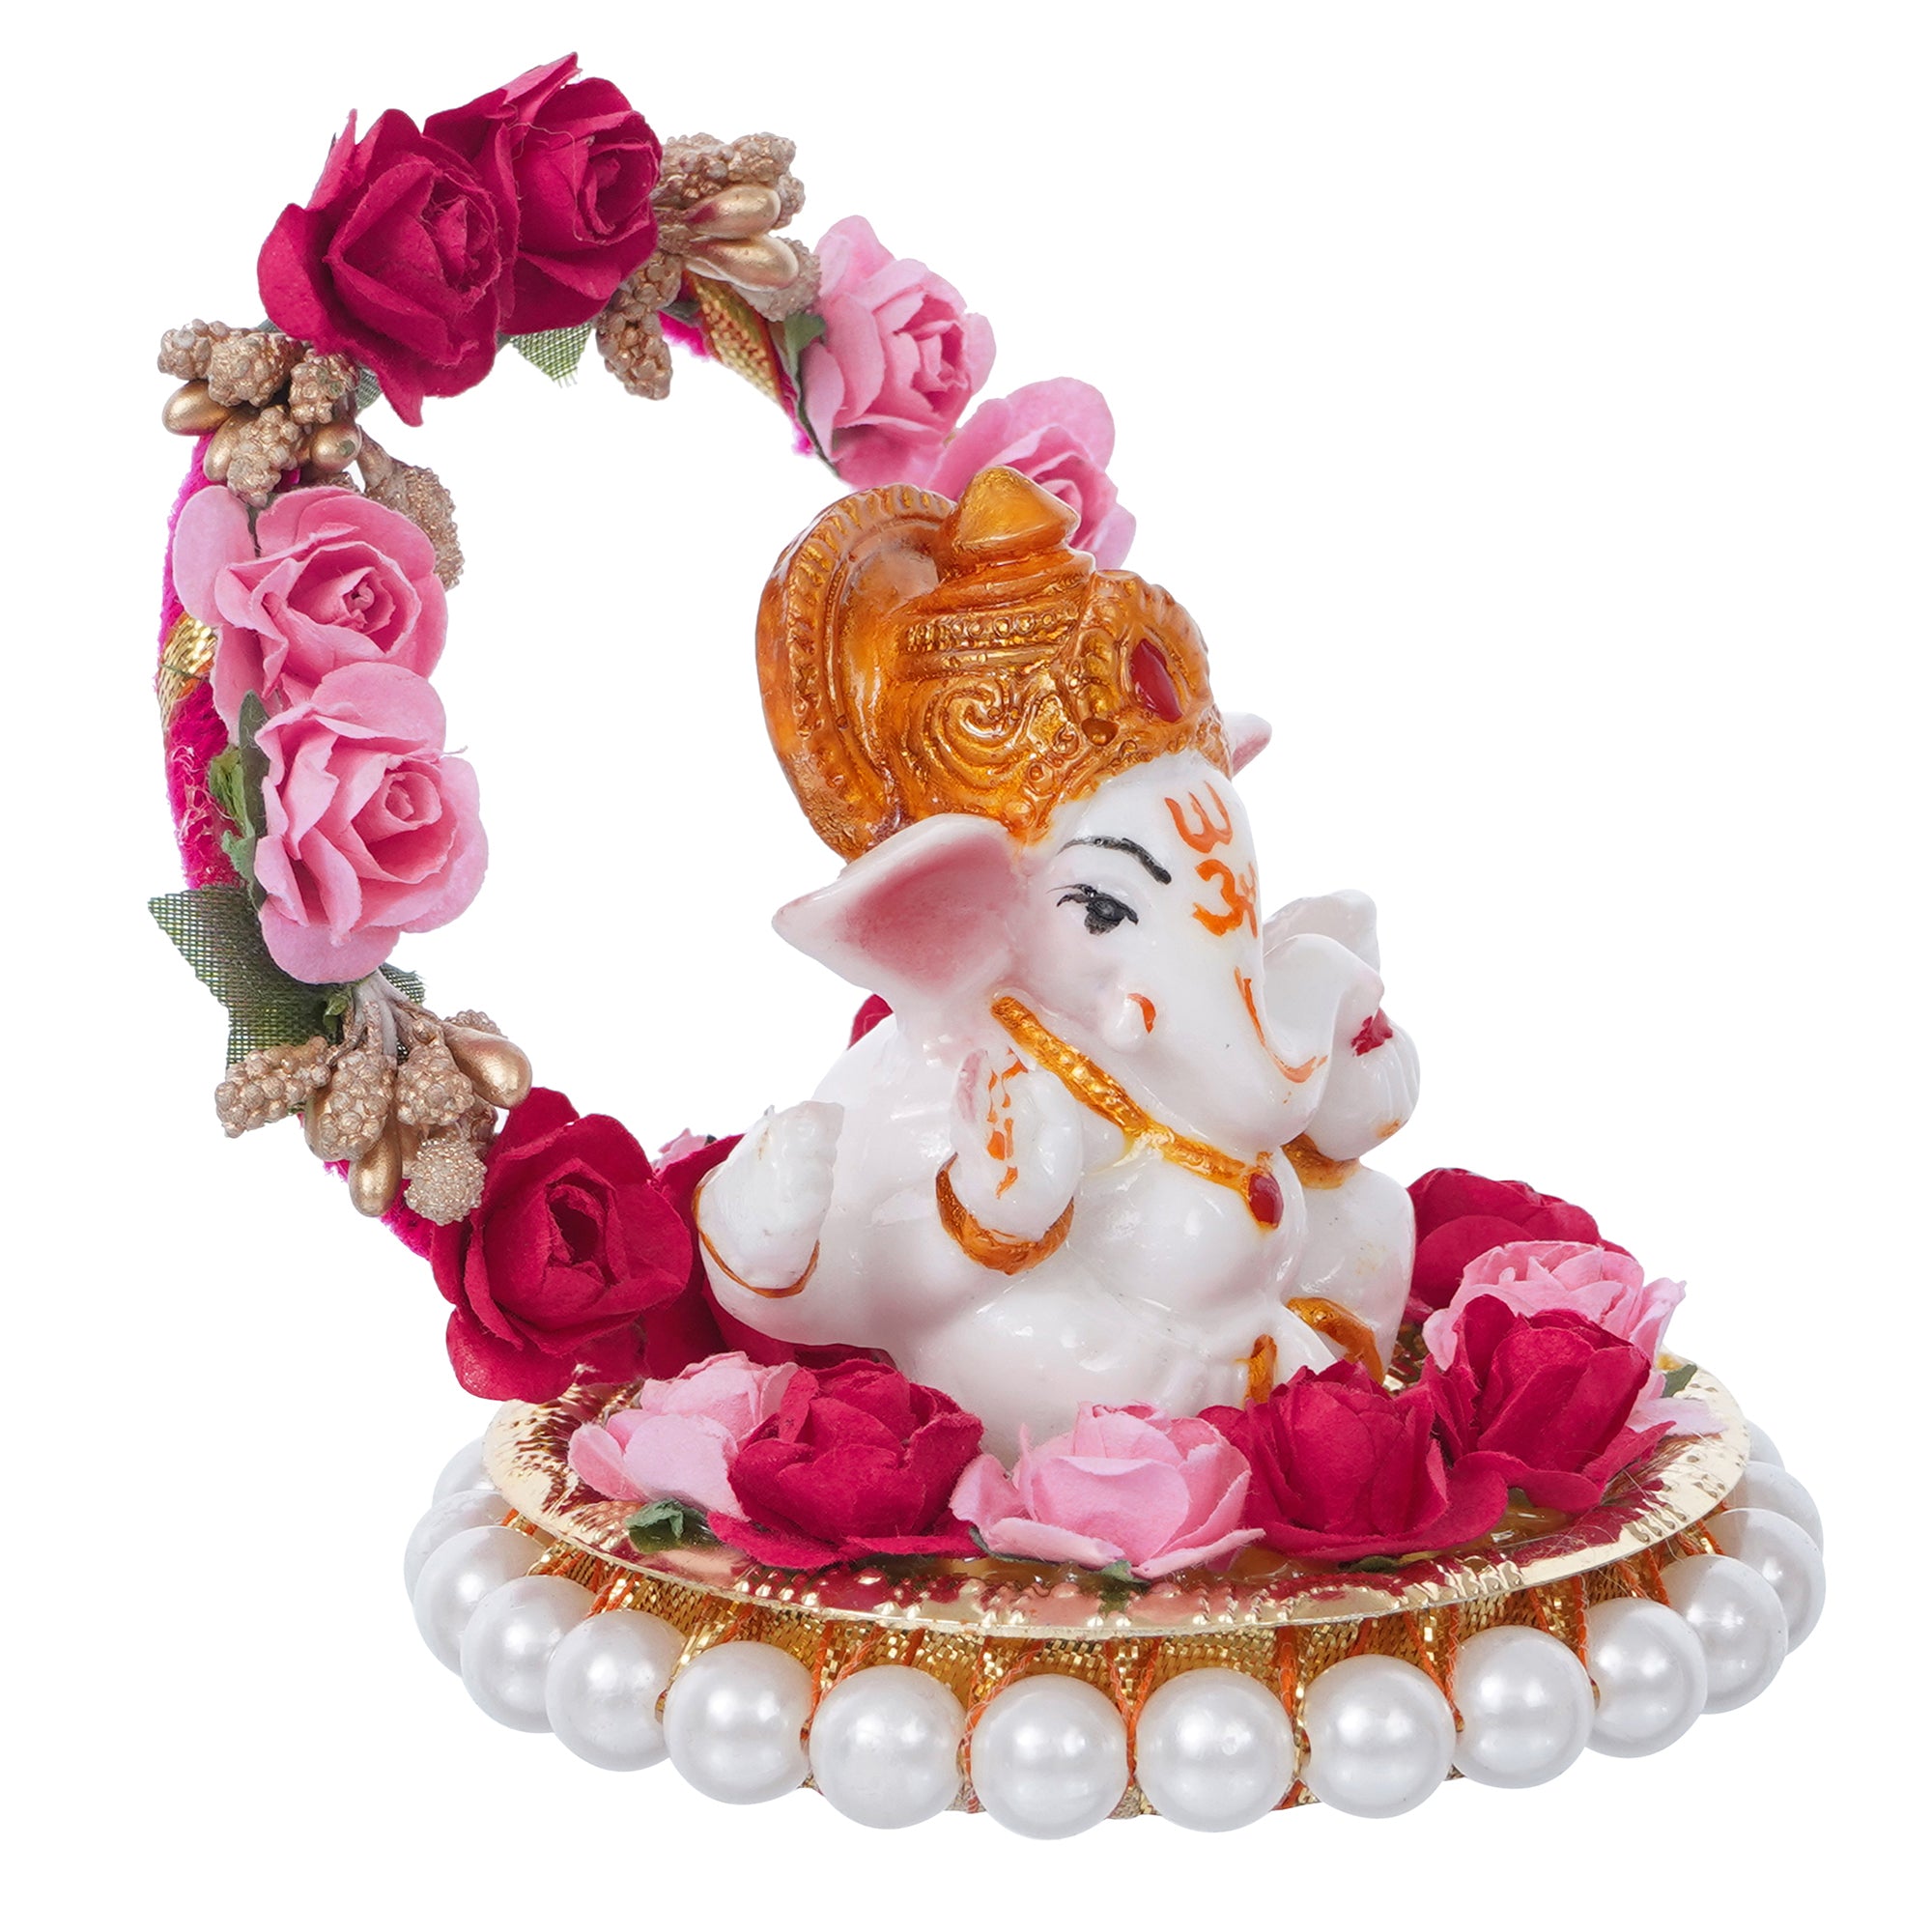 Polyresin Lord Ganesha Idol on Decorative Handcrafted Plate with Throne of Pink and Red Flowers 4